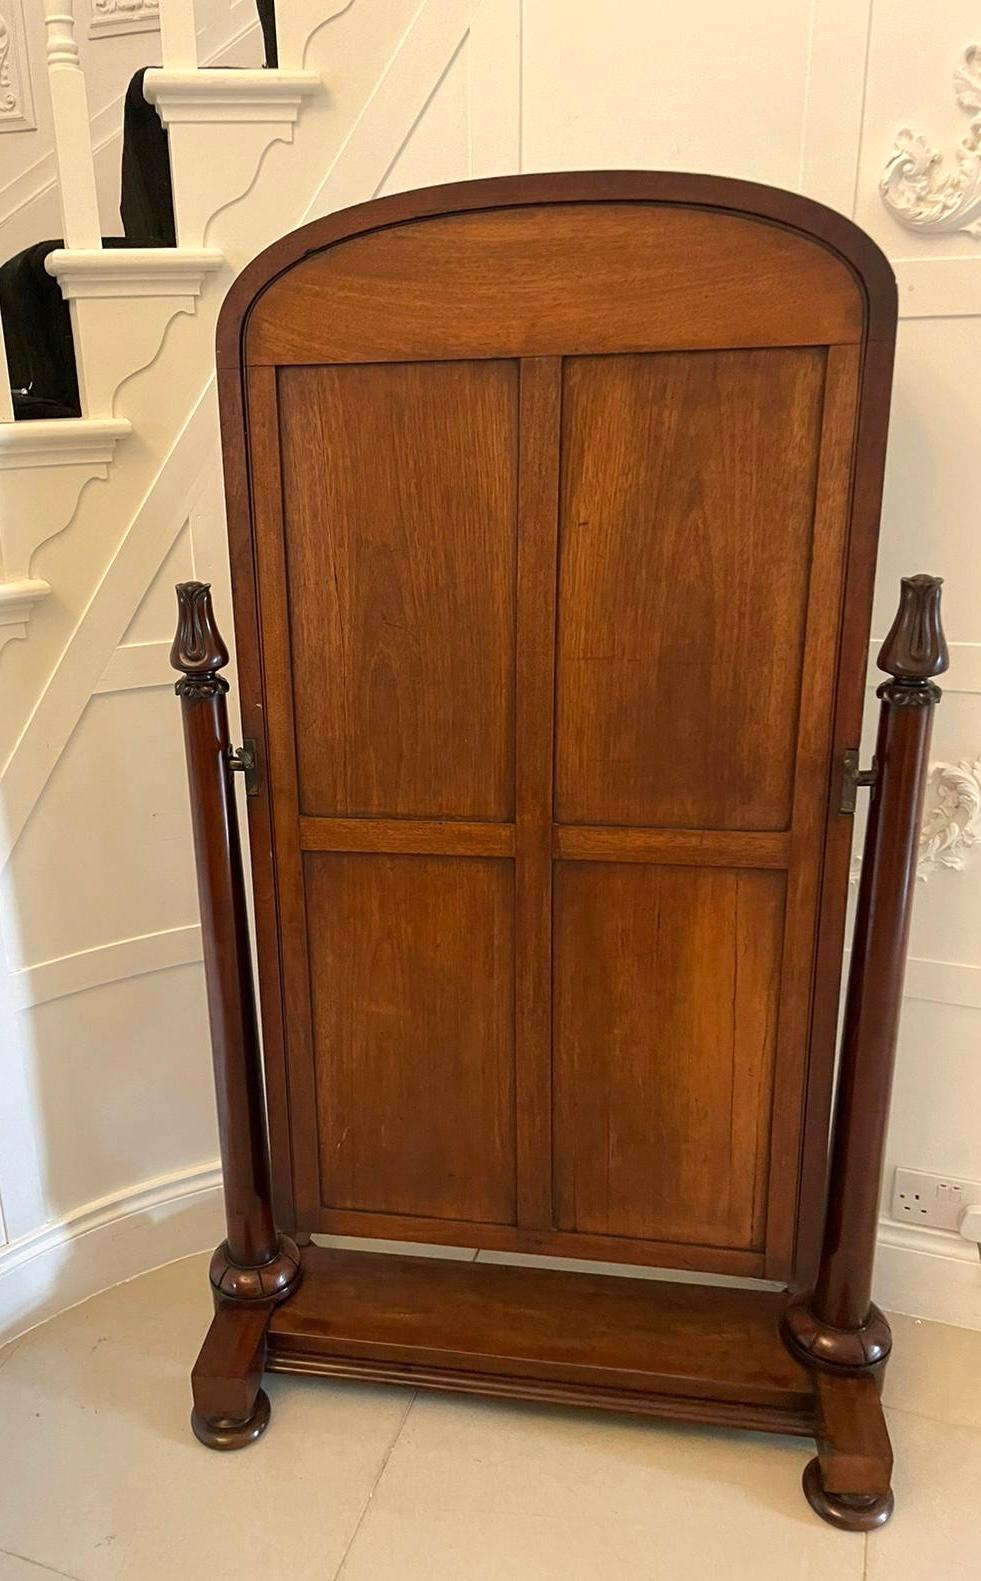 Antique Victorian quality figured mahogany free standing cheval mirror having a large adjustable arched top, quality figured mahogany cheval mirror flanked by figured mahogany columns with carved tulips tops supported by a figured mahogany base with